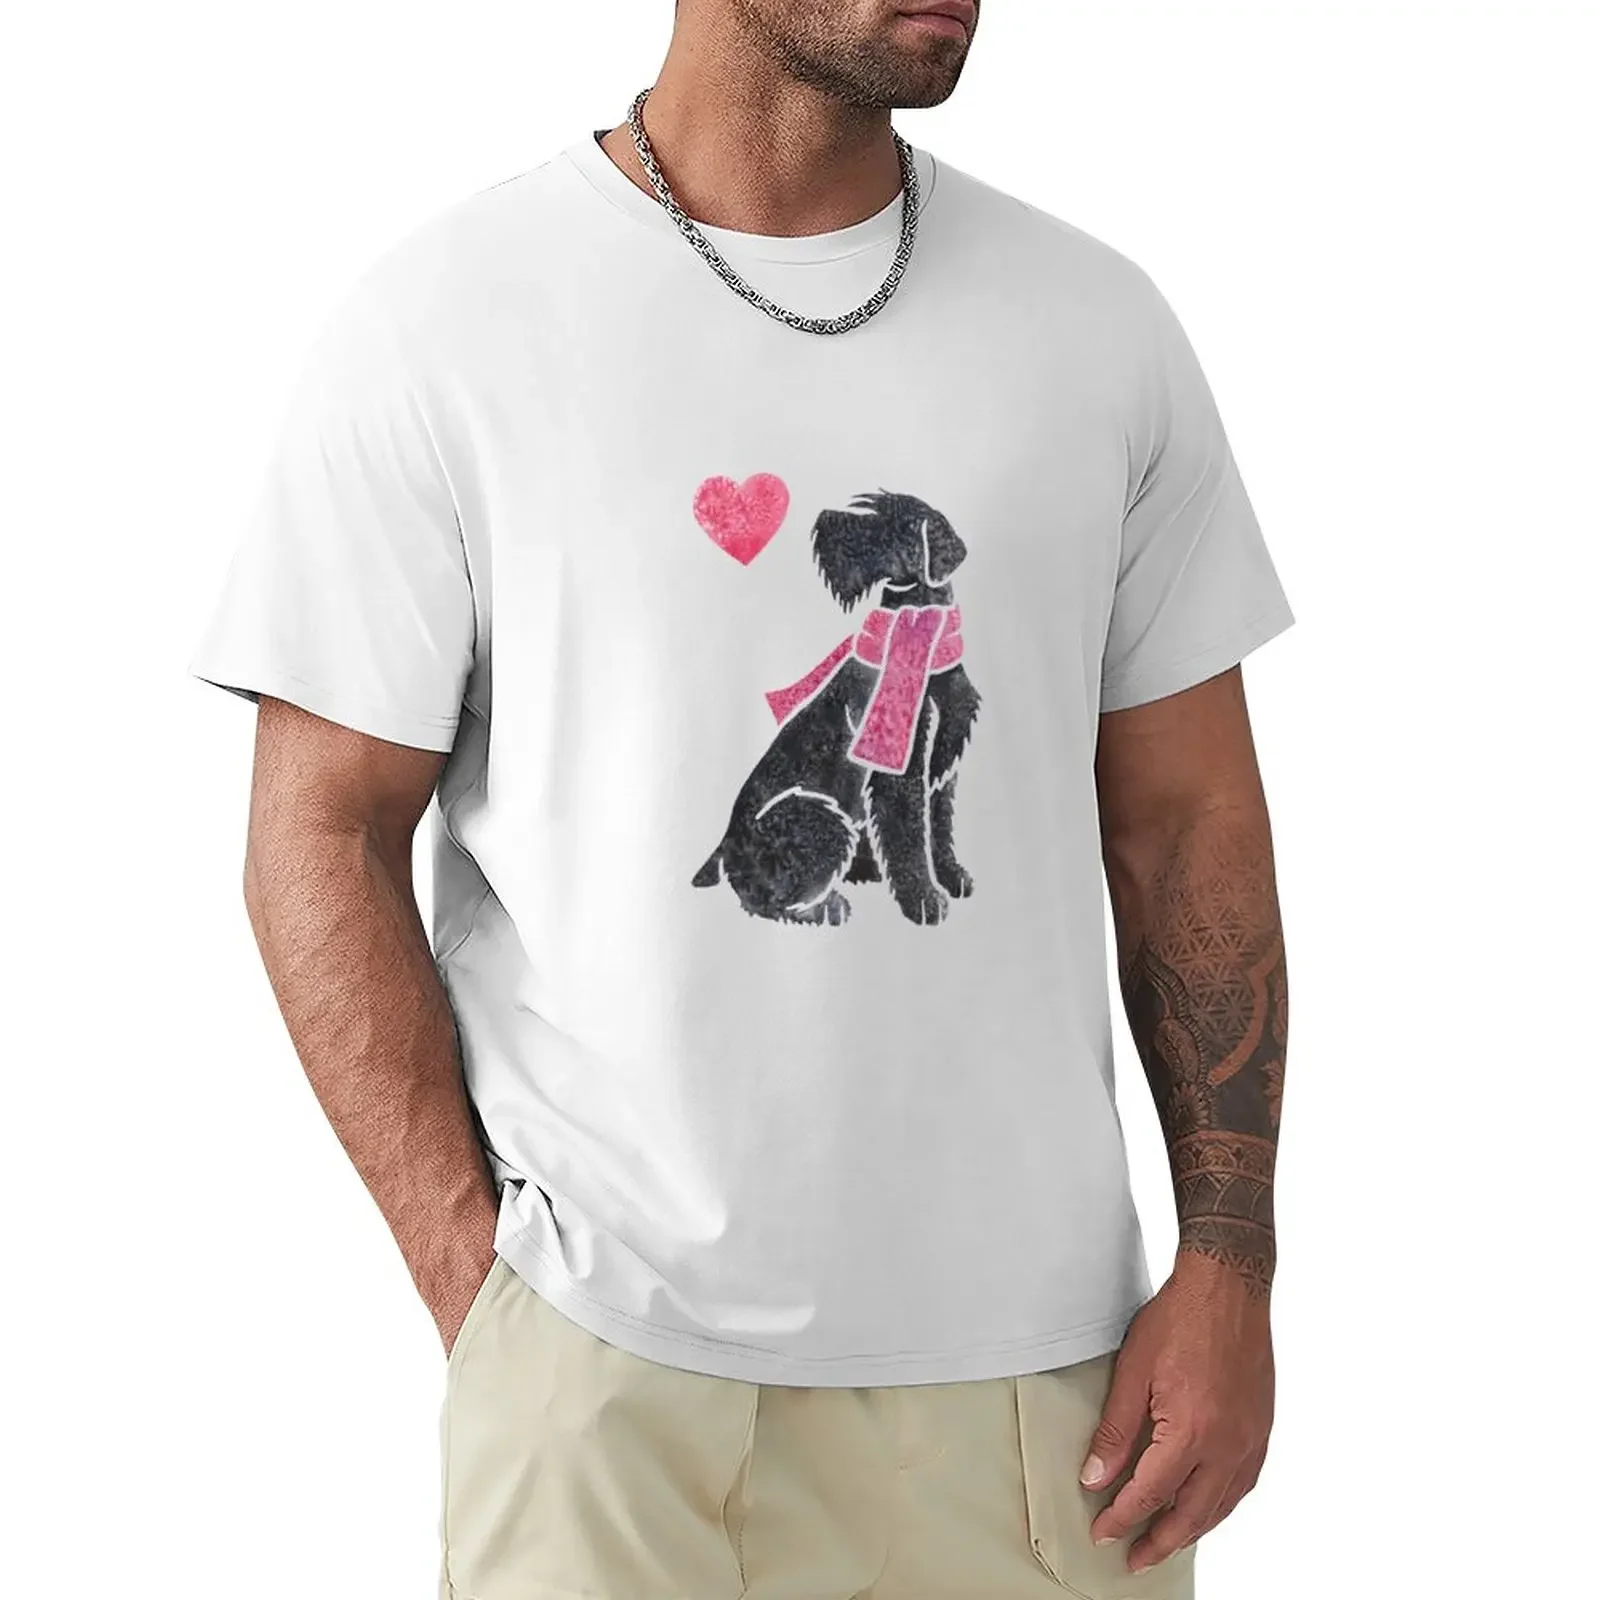 Watercolour Giant Schnauzer T-Shirt vintage anime mens white t shirts anime customs tops aesthetic clothes mens clothing modal pink carnival music tour p nk summer tour mens womens unisex t shirt aesthetic clothes graphic tshirts tops clothing tee